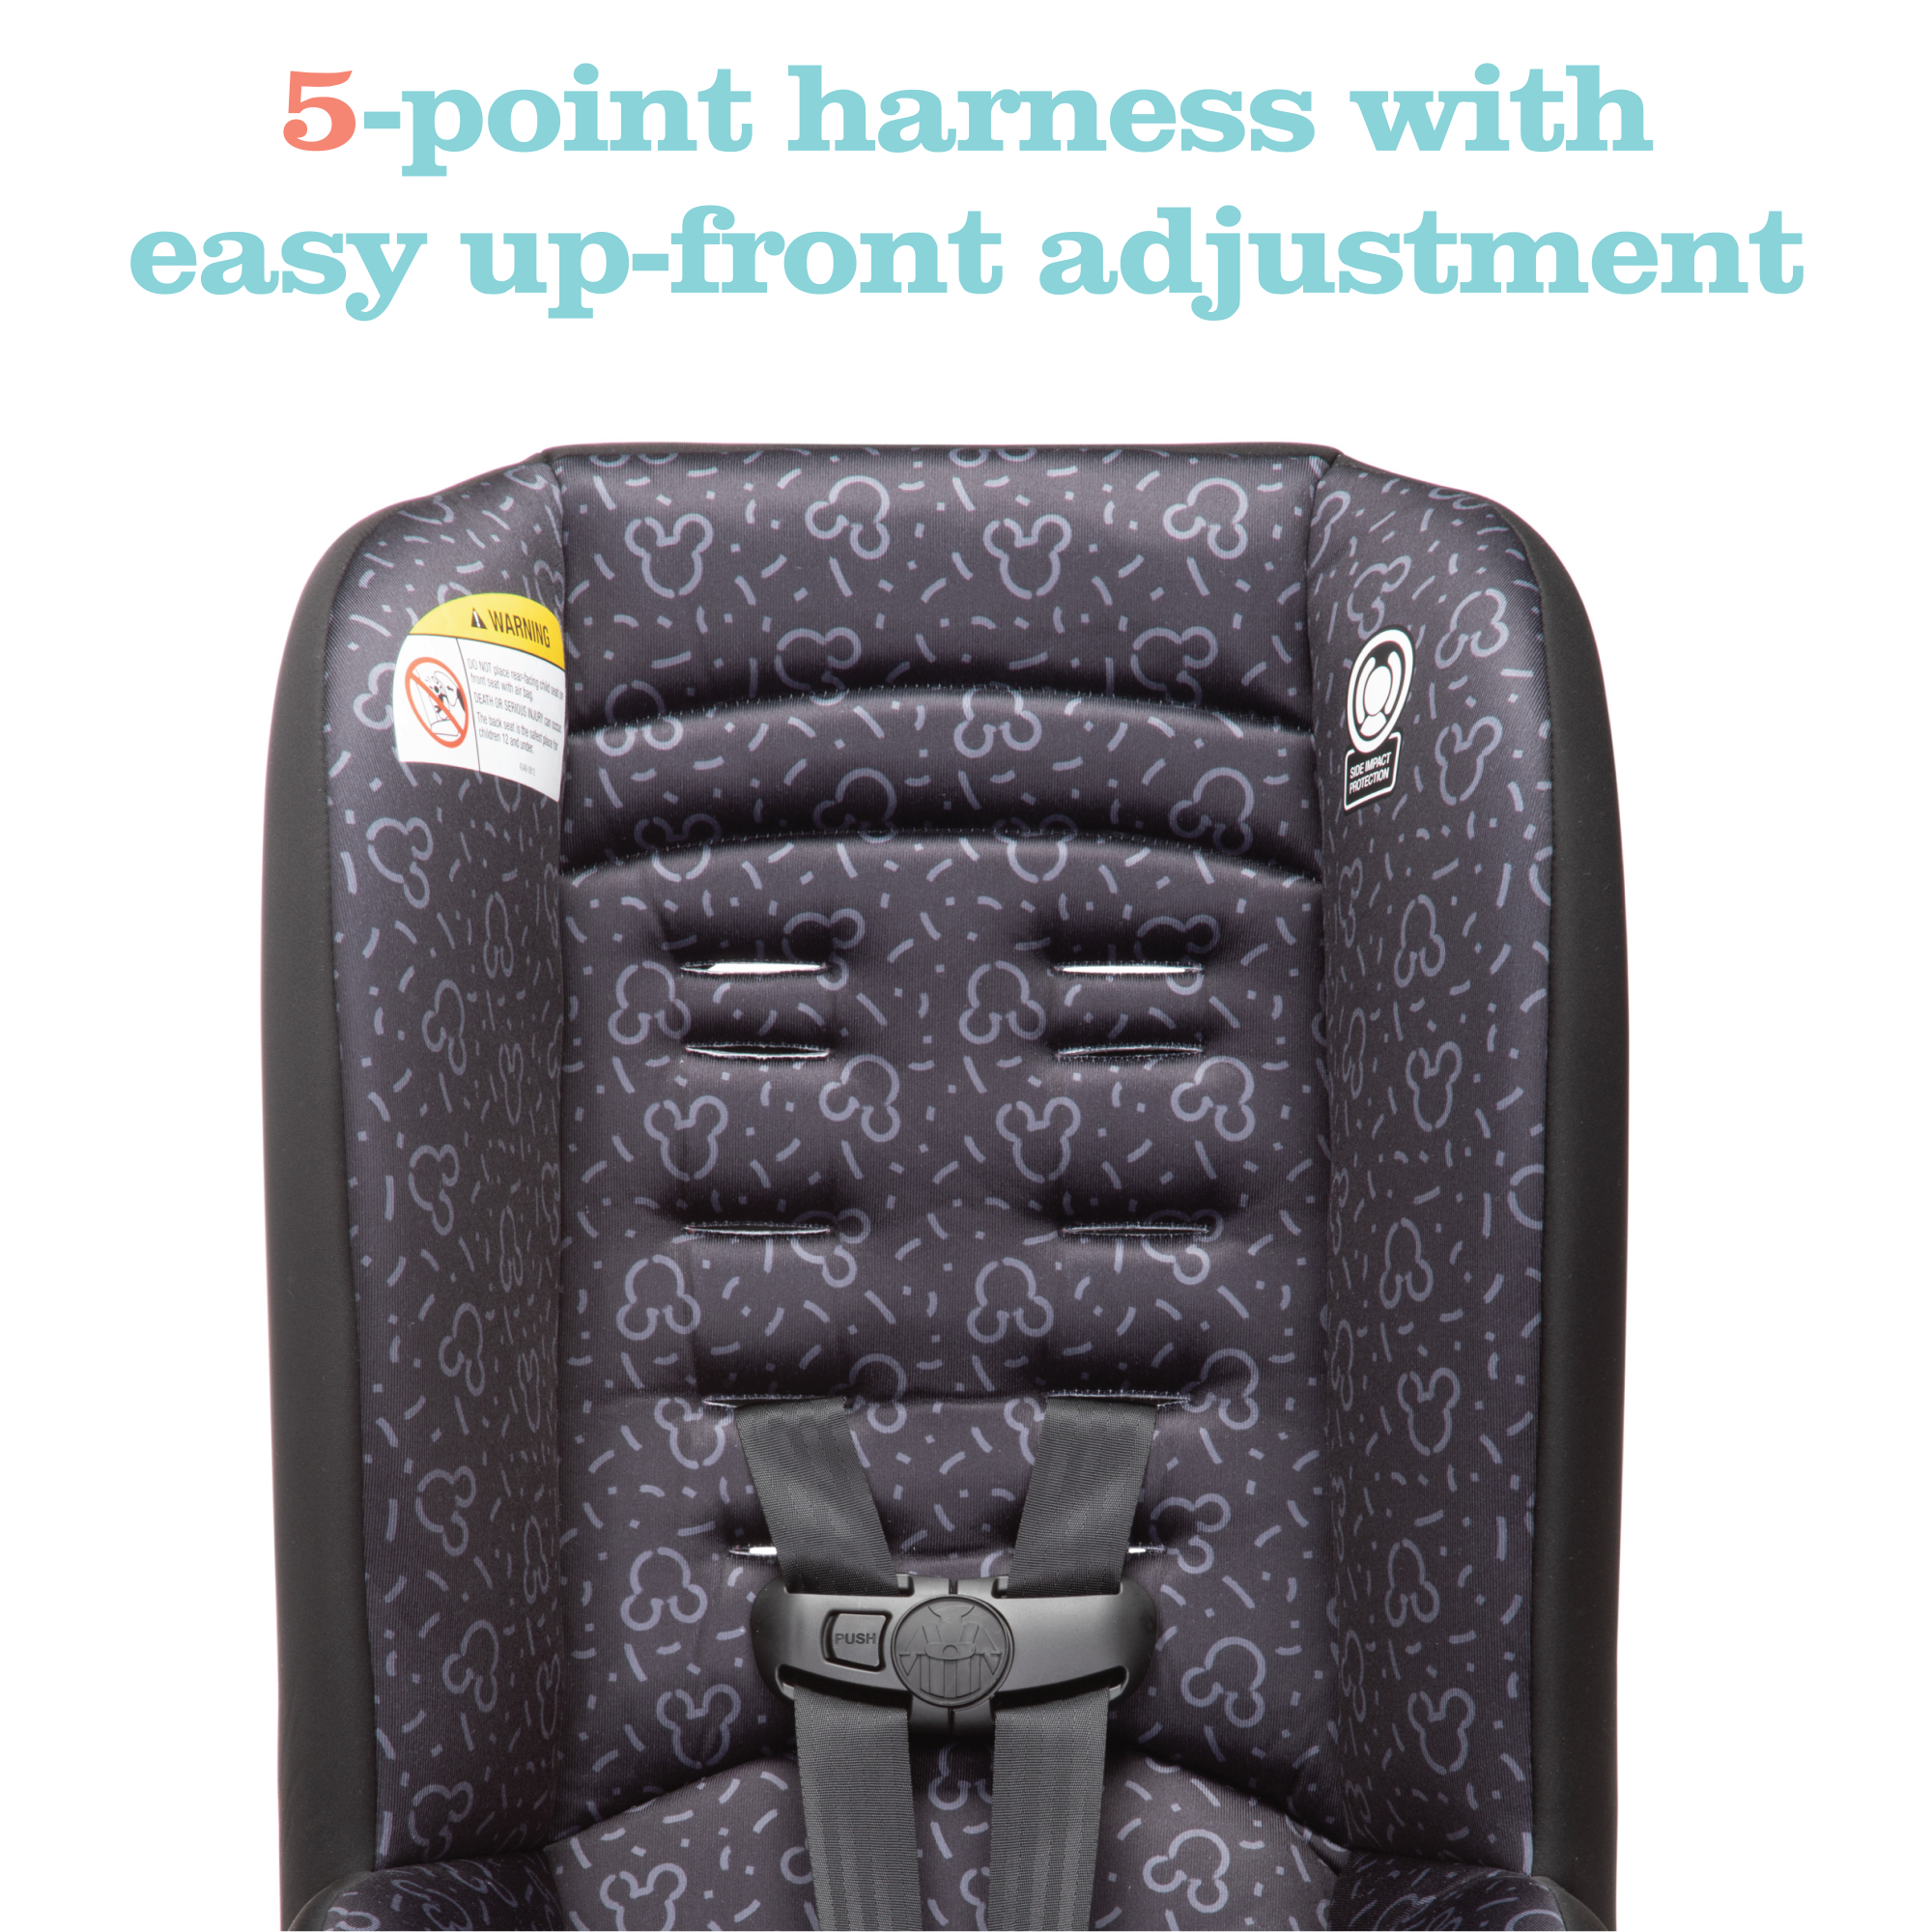 Disney Baby Jive 2-in-1 Convertible Car Seat - 5-point harness with easy up-front adjustment